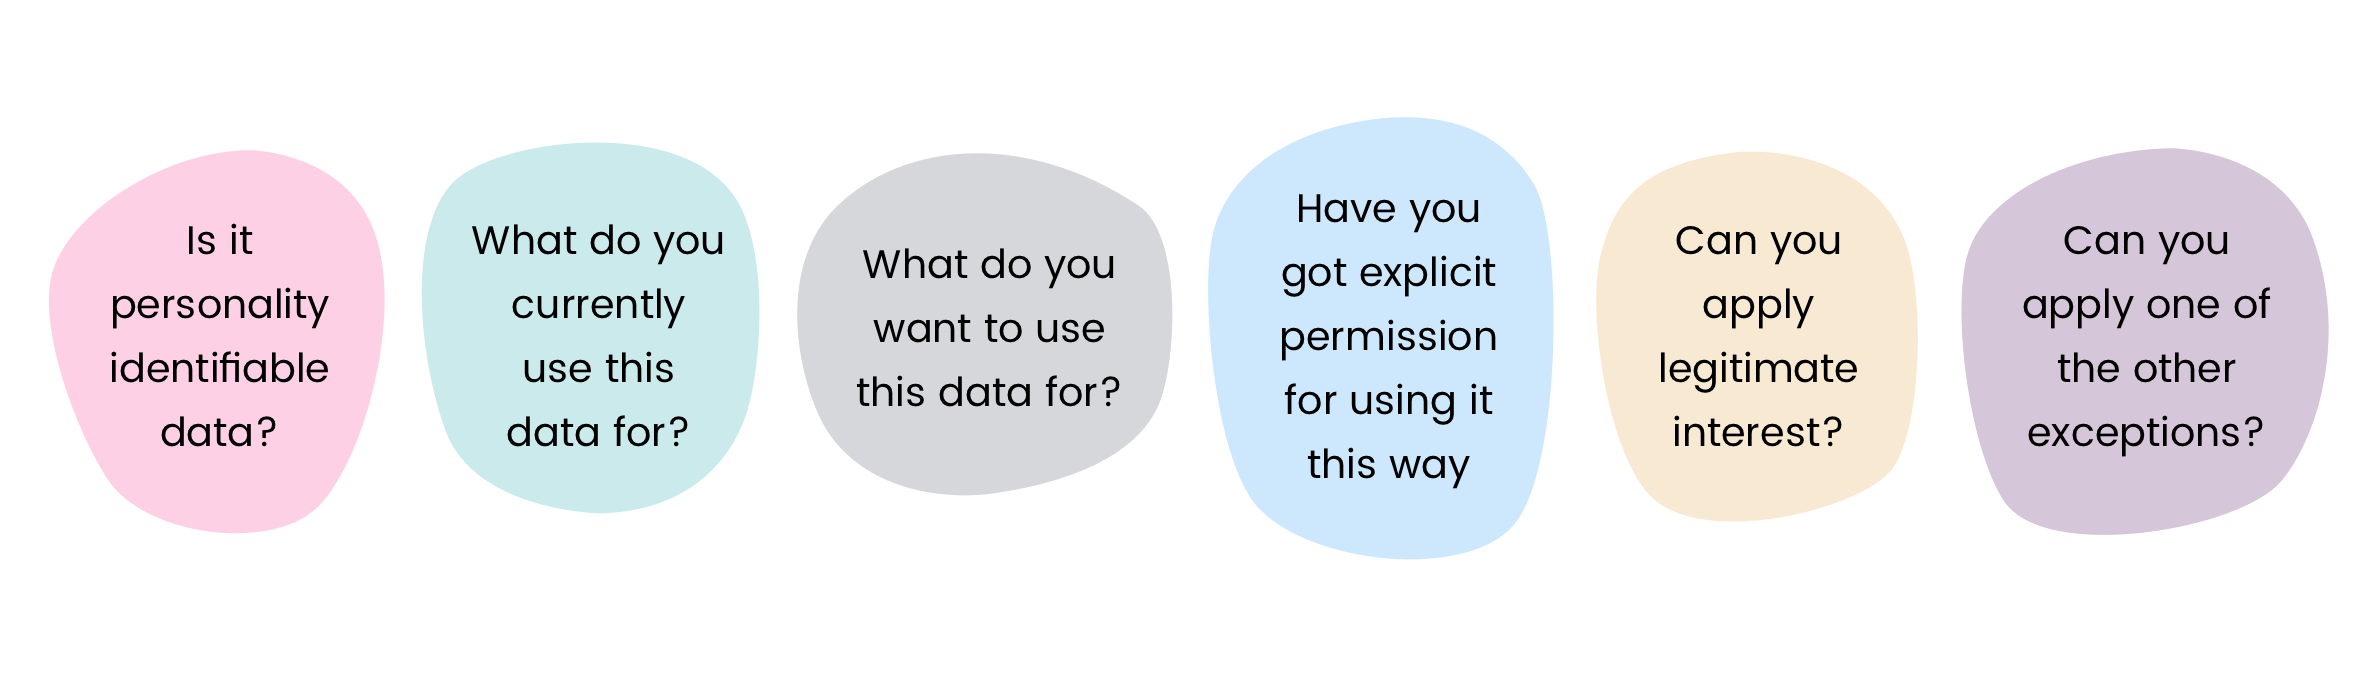 GDPR questions to ask